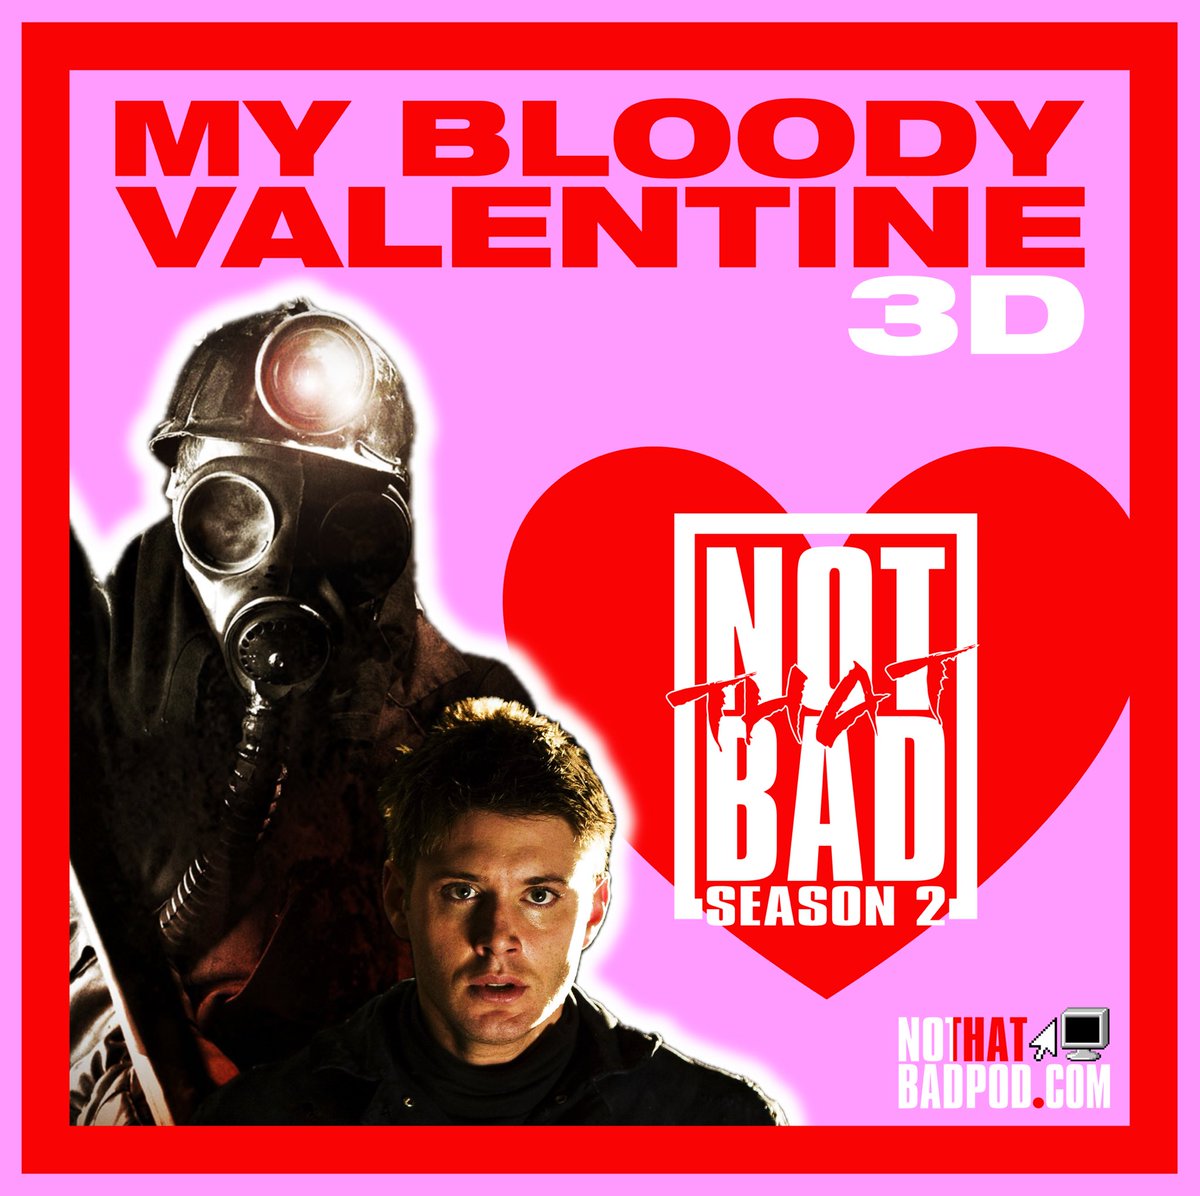 Celebrate a belated Valentine’s Day present from us to you as we discuss #MyBloodyValentine (2009)!

open.spotify.com/episode/1GzcbO…

podcasts.apple.com/us/podcast/not…

youtu.be/3Tap8iHshtE?si…

#JensenAckles #Supernatural #Horror #notthatbad #MyBloodyValentine3D #remake